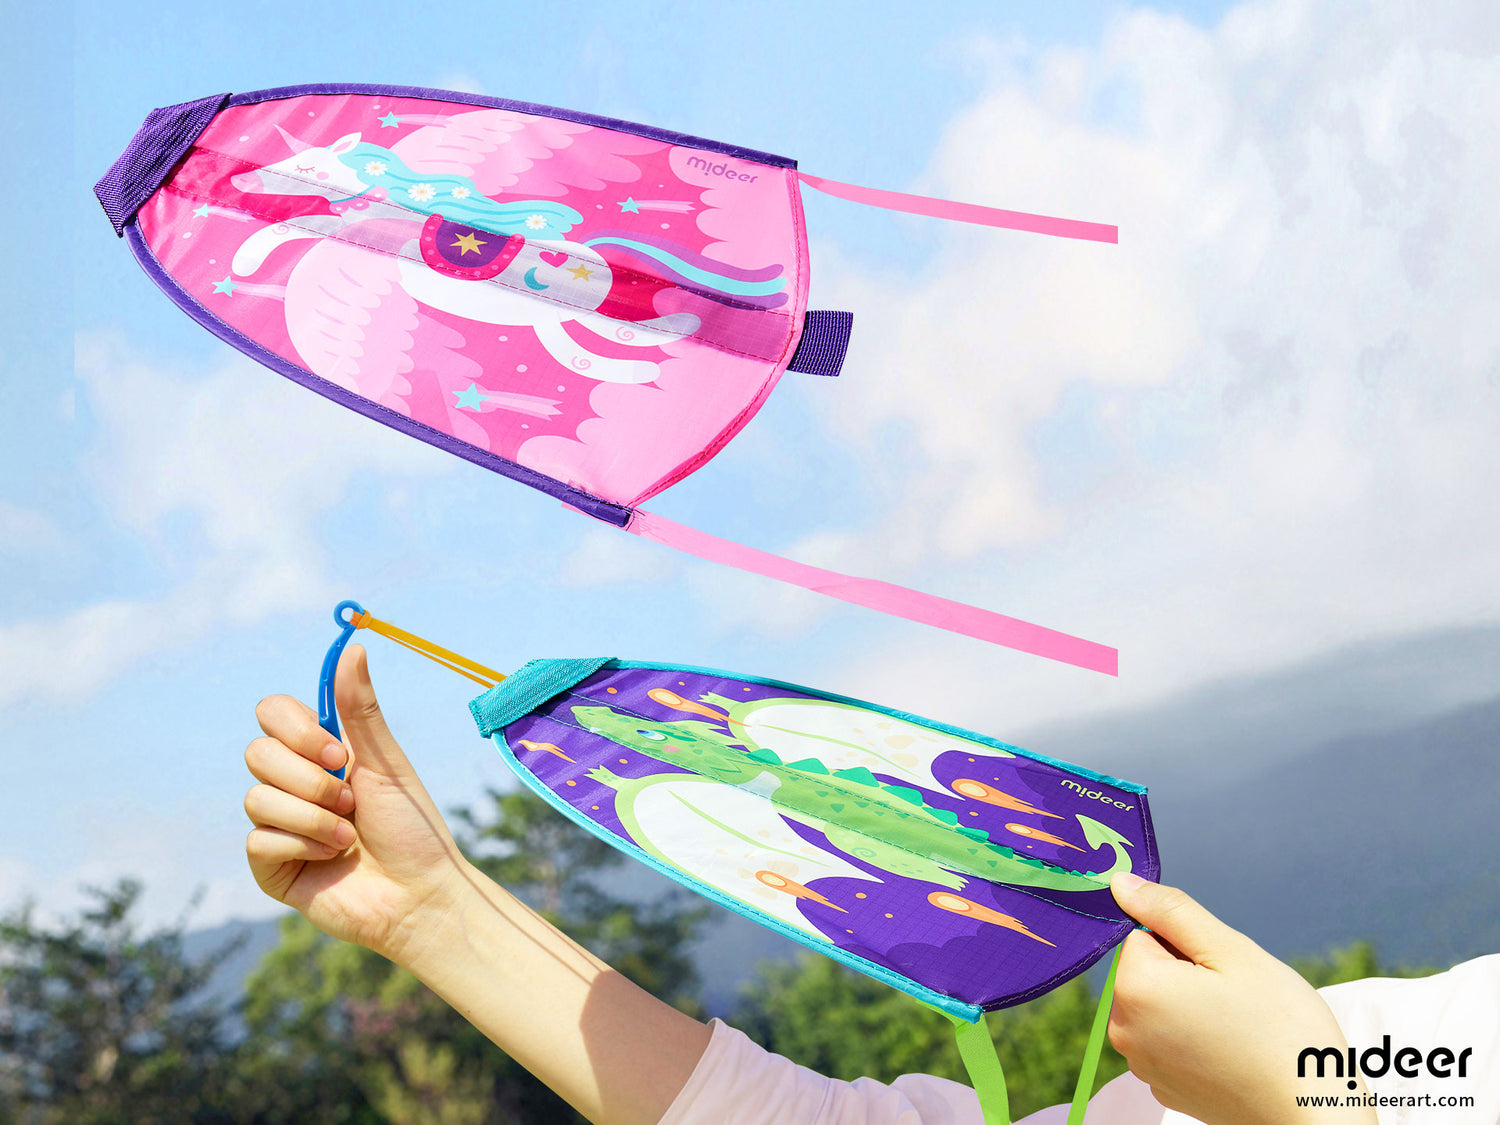 What Makes Kite Flying a Valuable Experience for Kids?